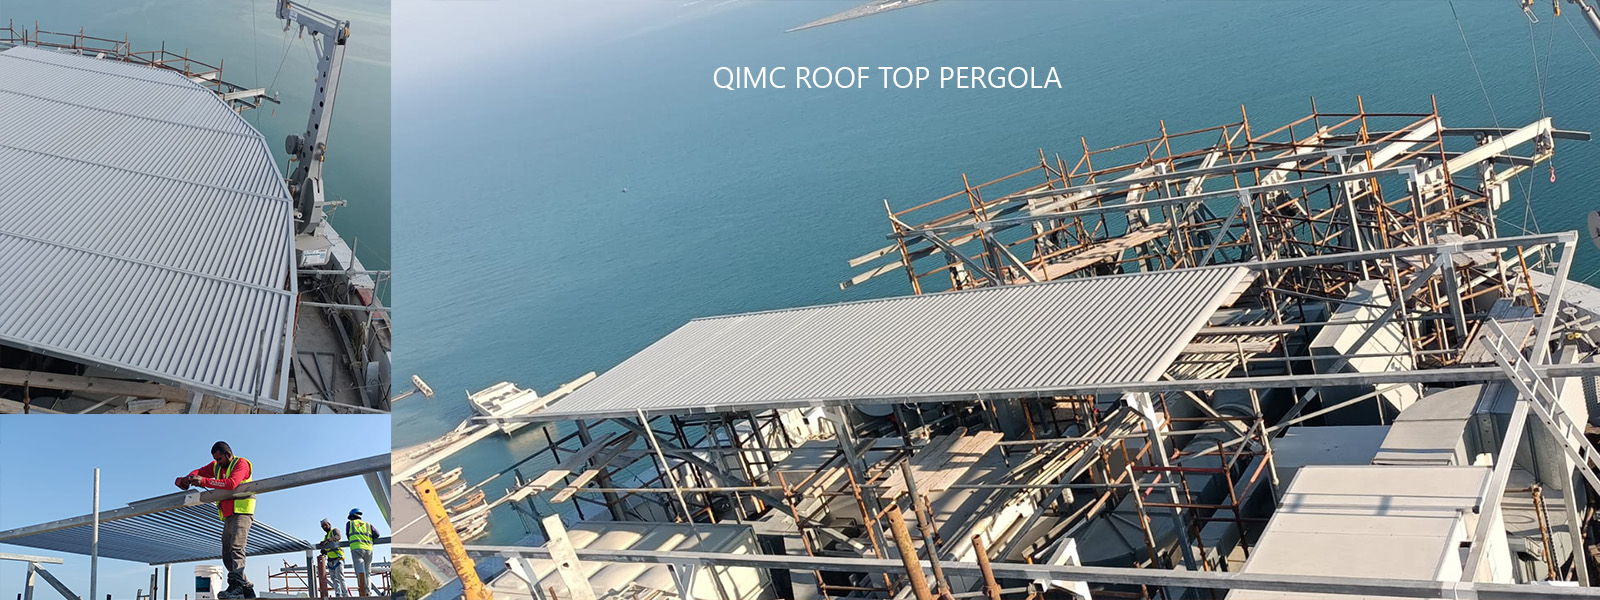 QIMC TOWER ROOF TOP PERGOLA ON GOING